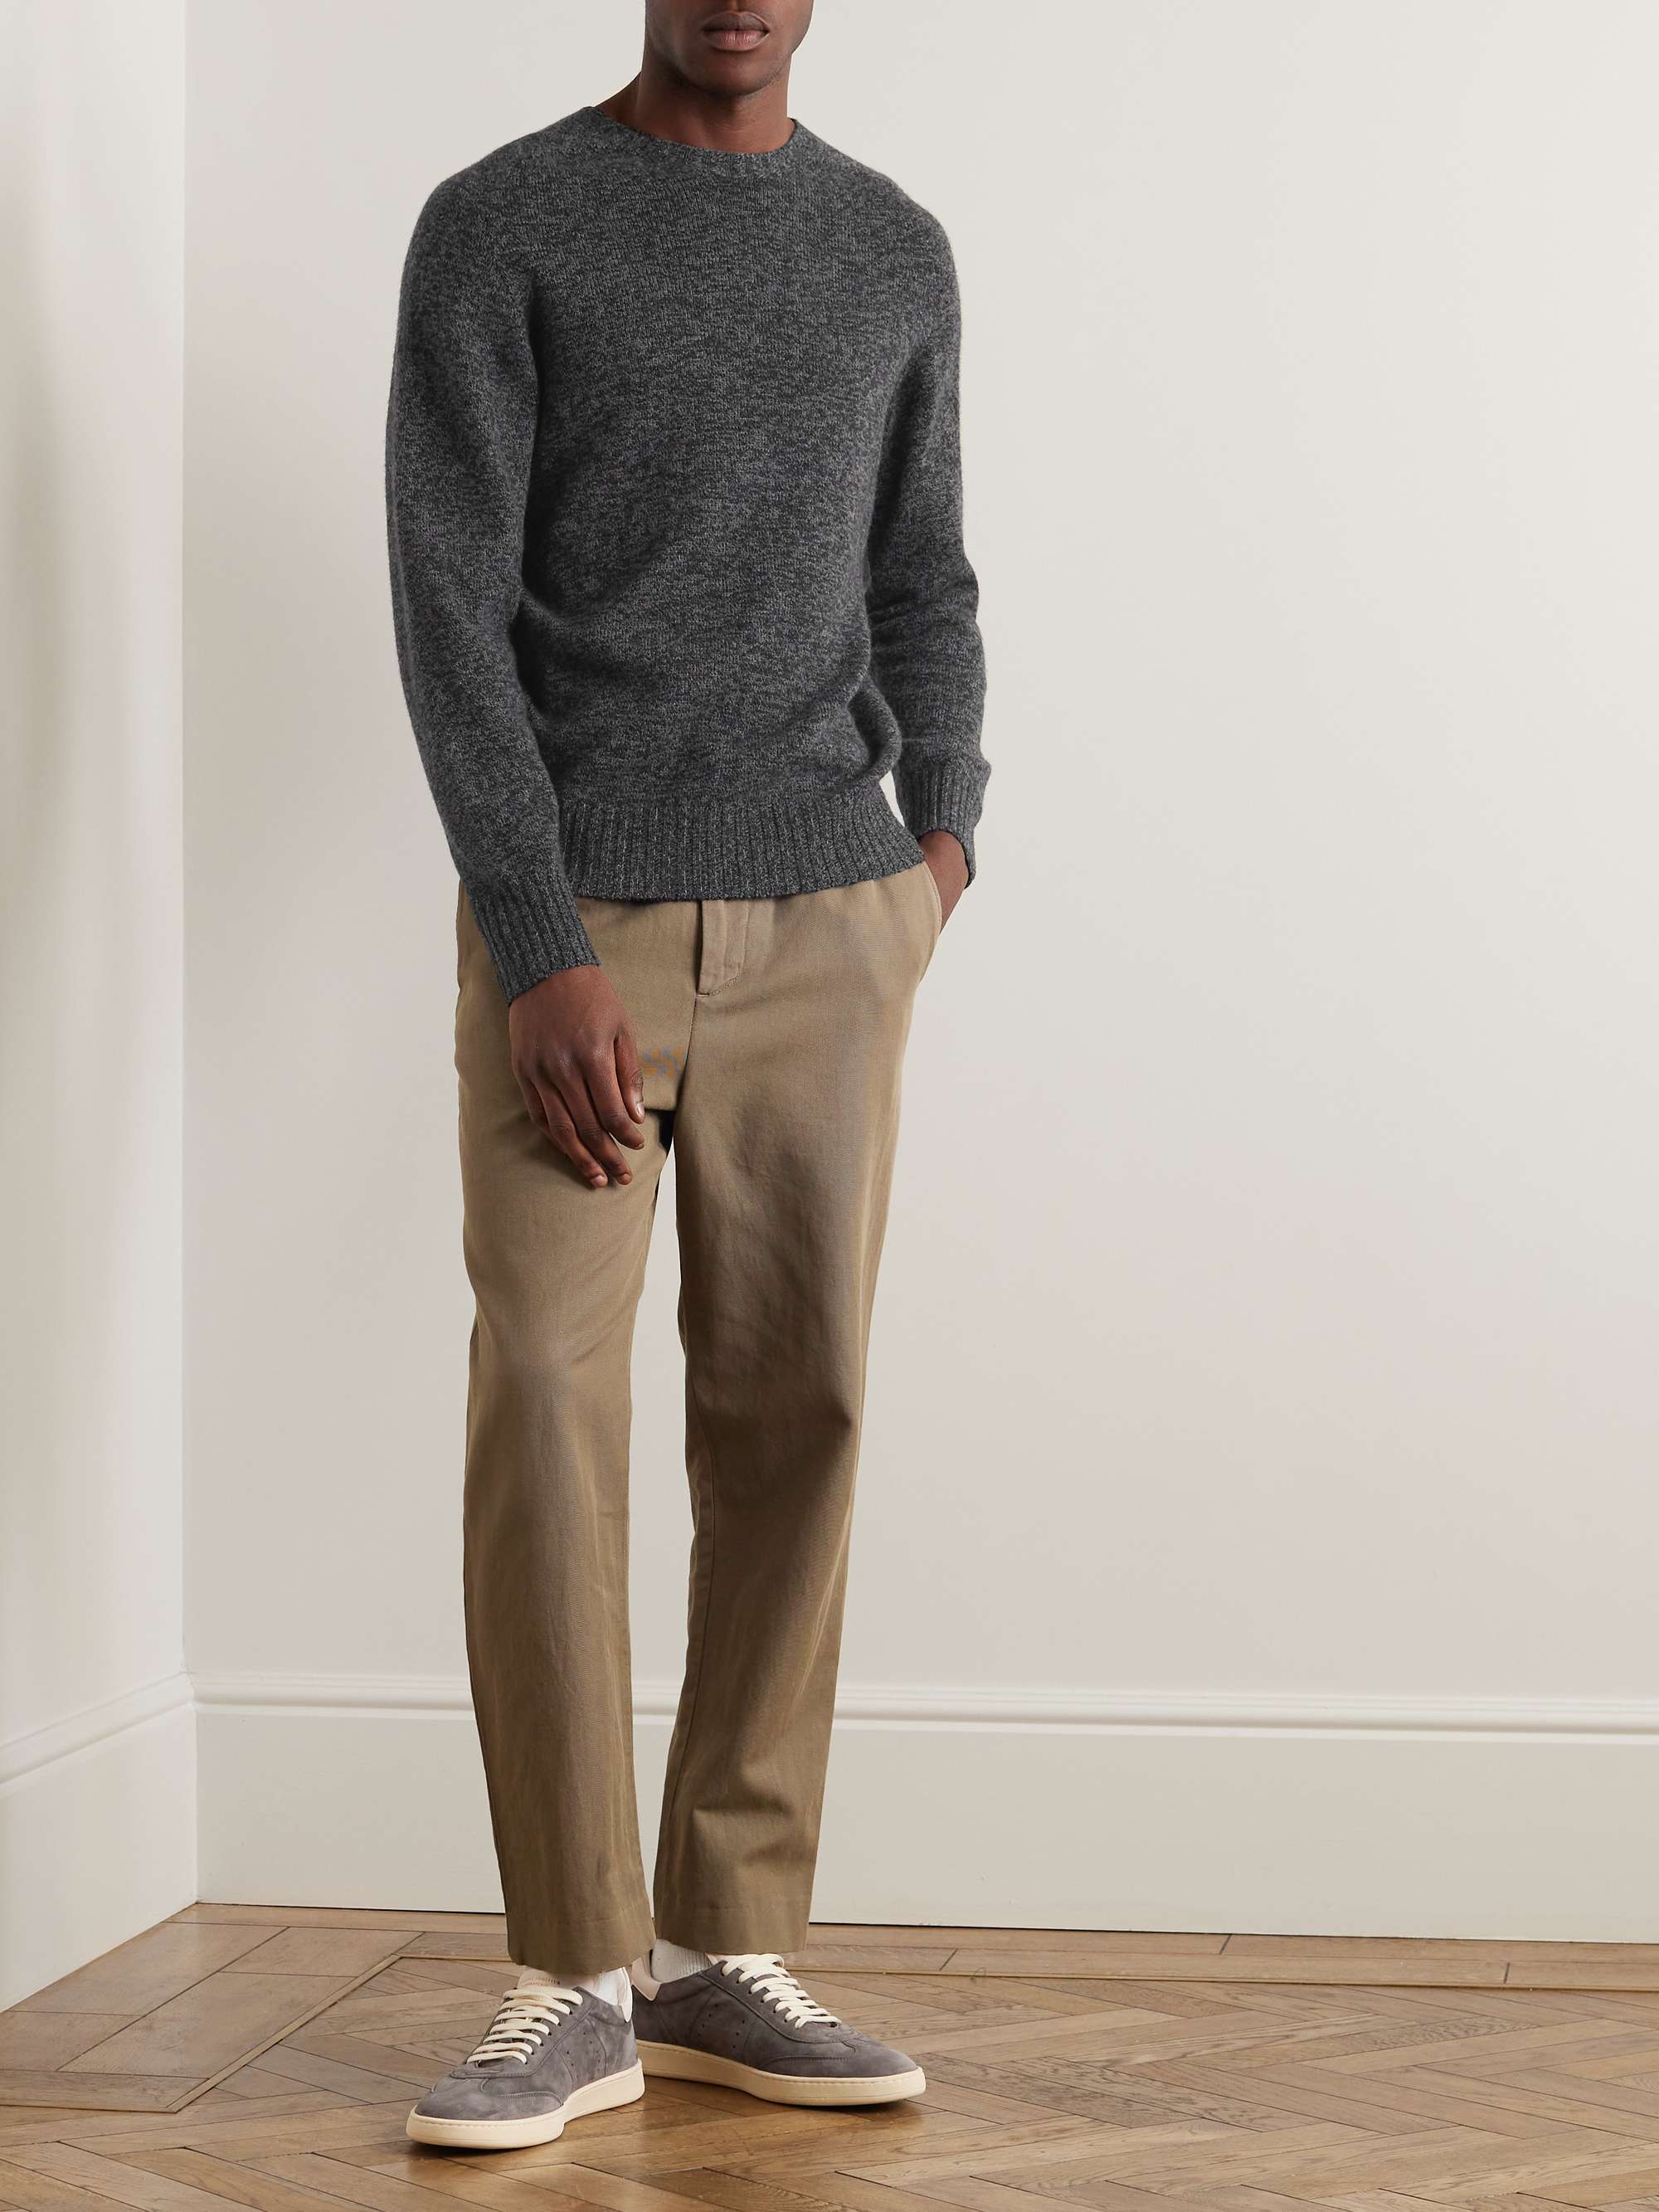 OFFICINE GÉNÉRALE Merino Wool and Cashmere-Blend Sweater for Men | MR ...